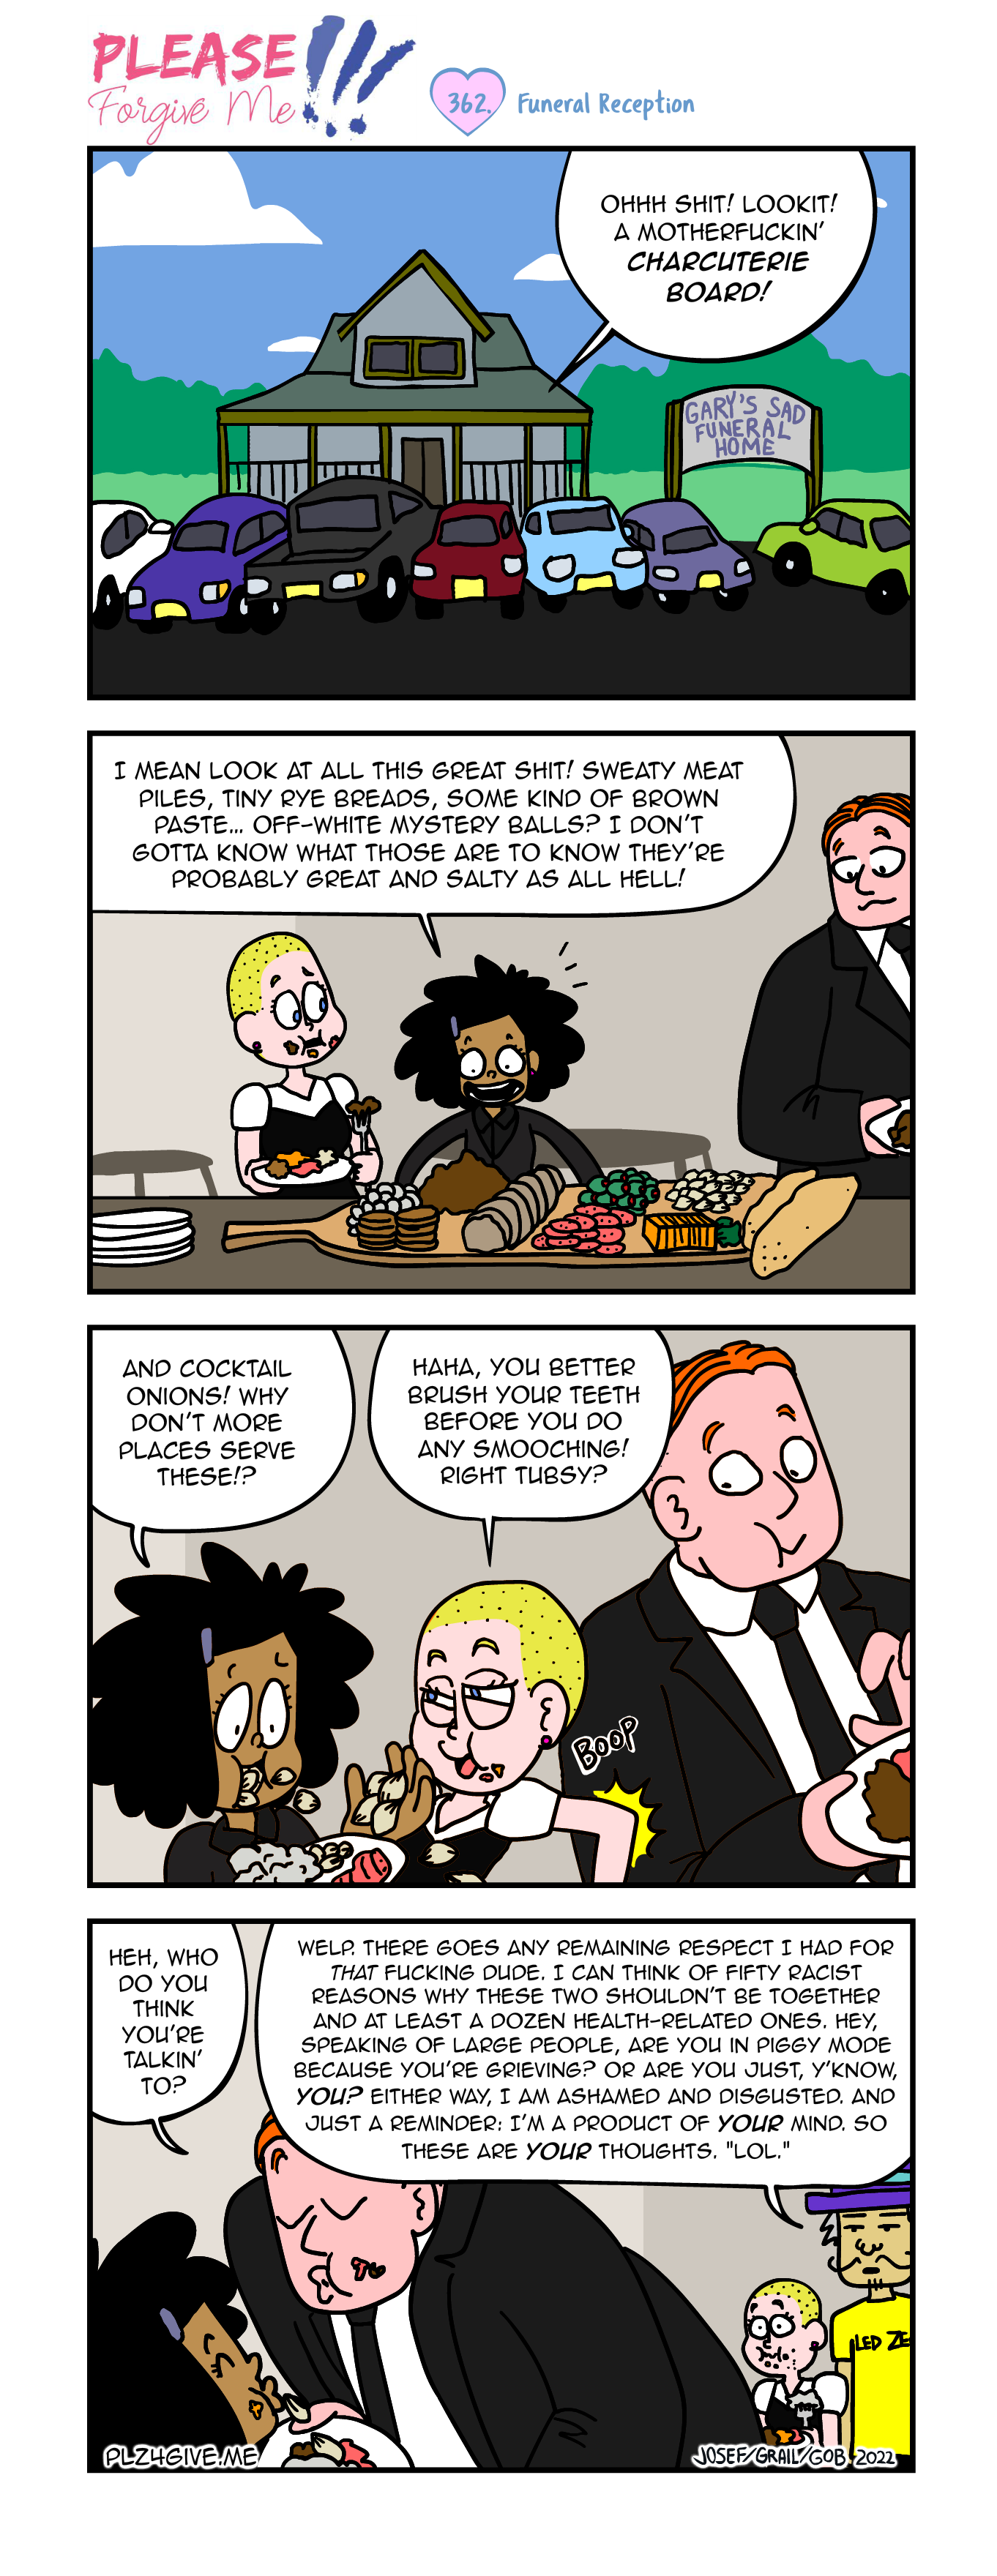 362: Funeral Reception